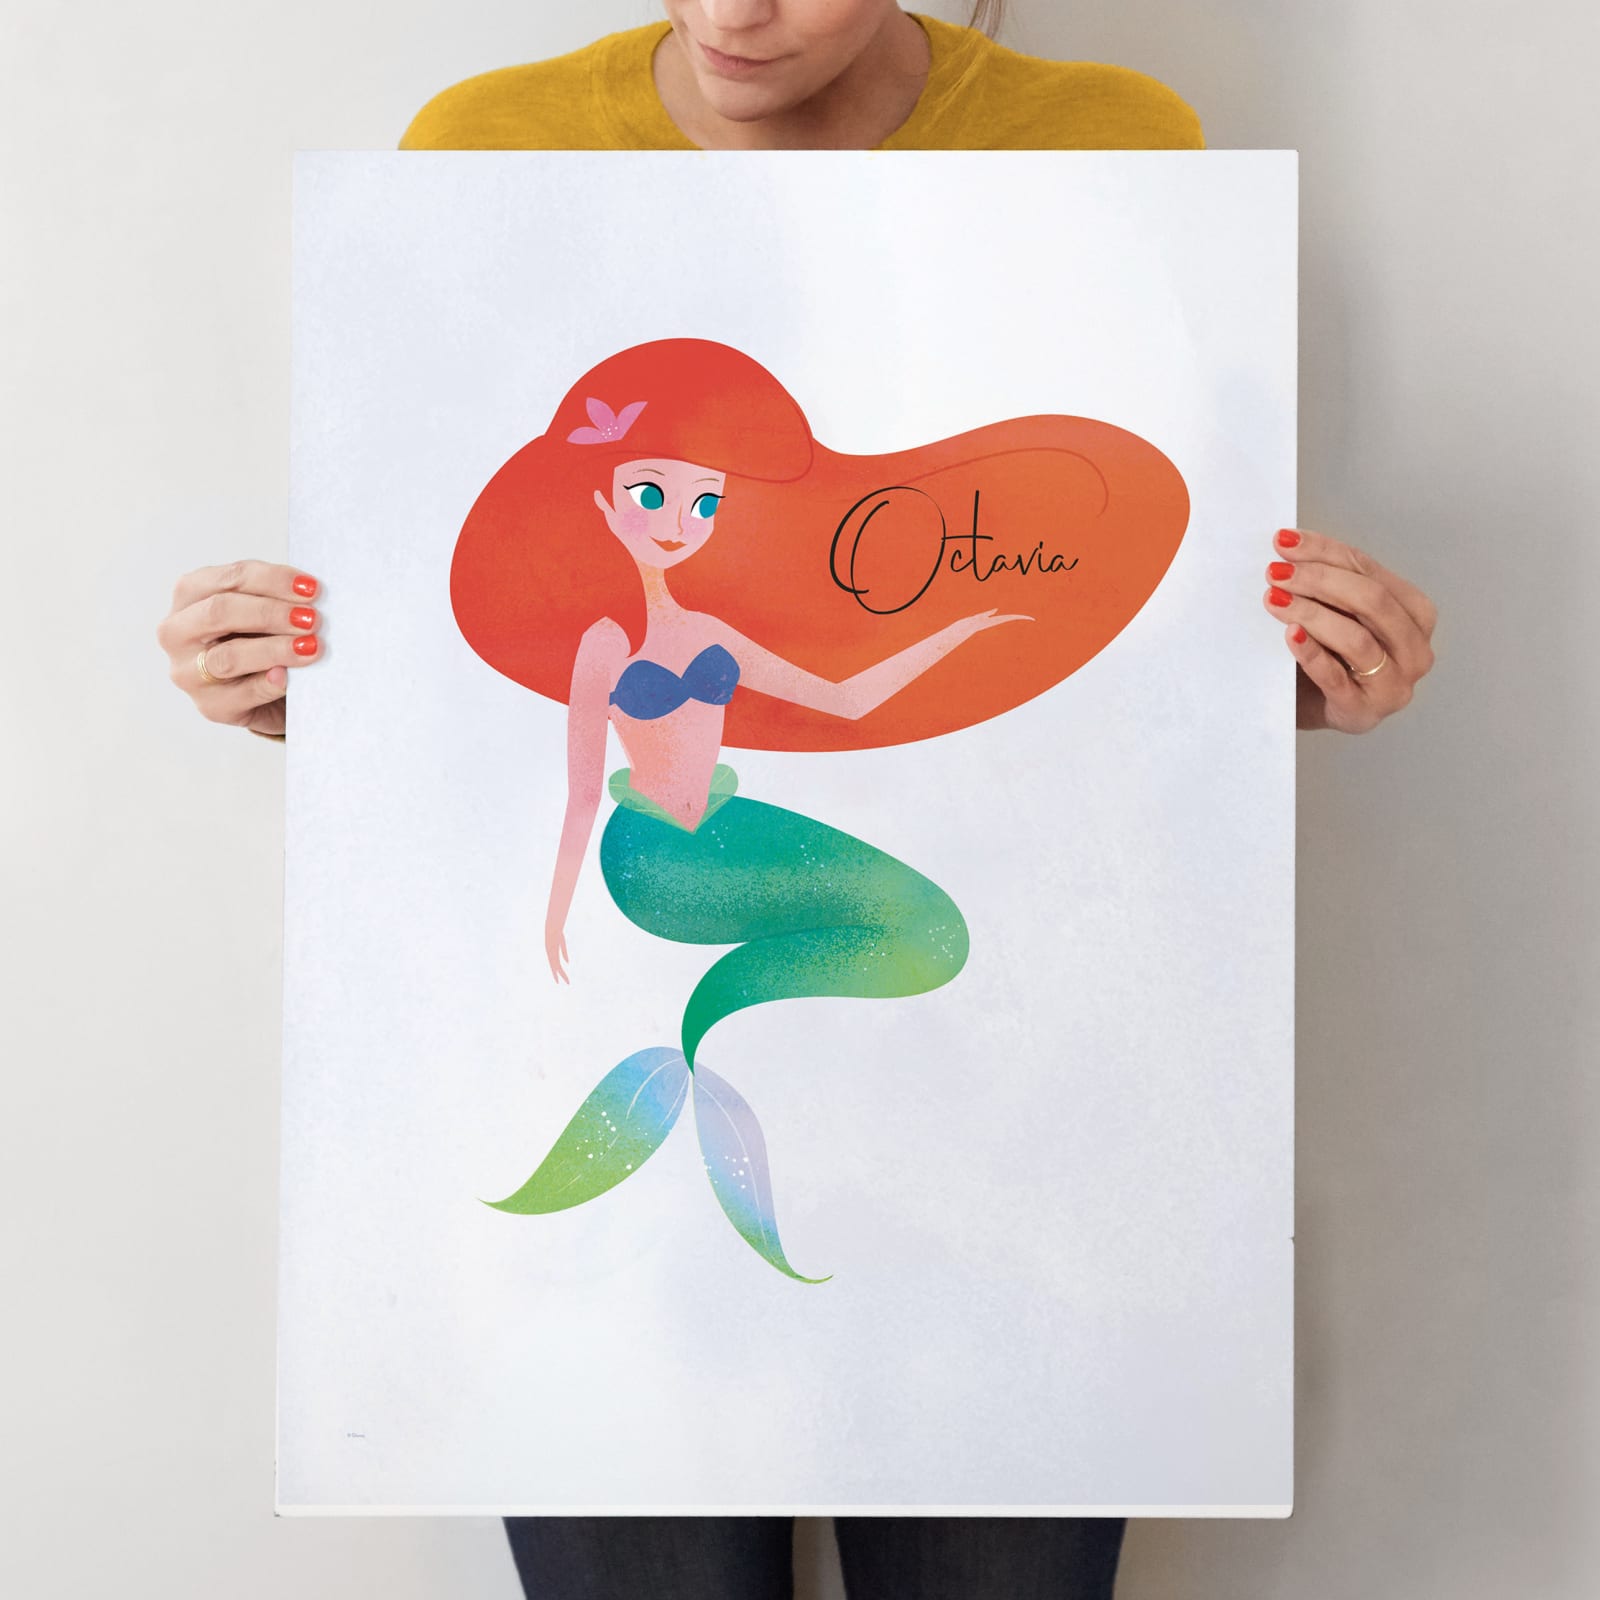 How to Draw Disney's The Little Mermaid - easy tutorial!